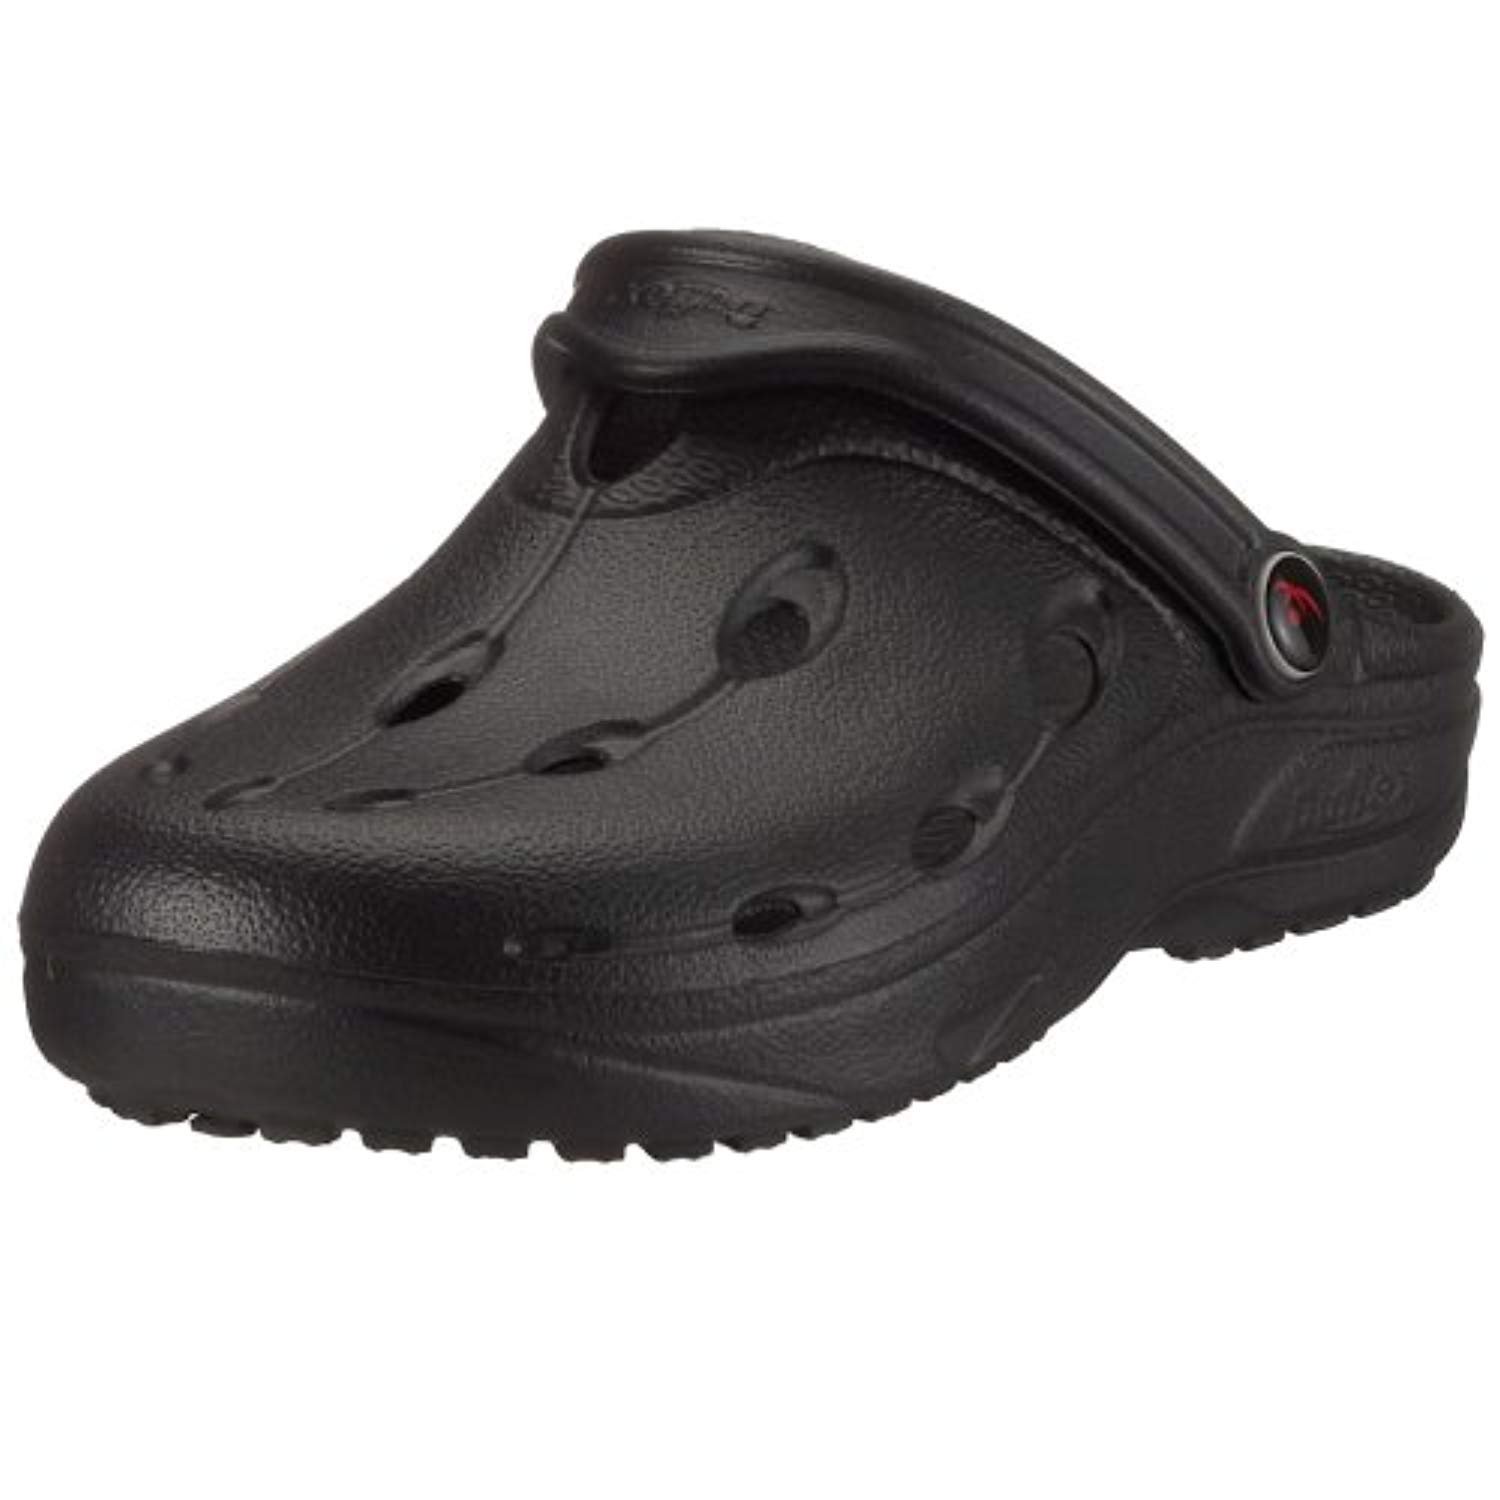 arch support clogs